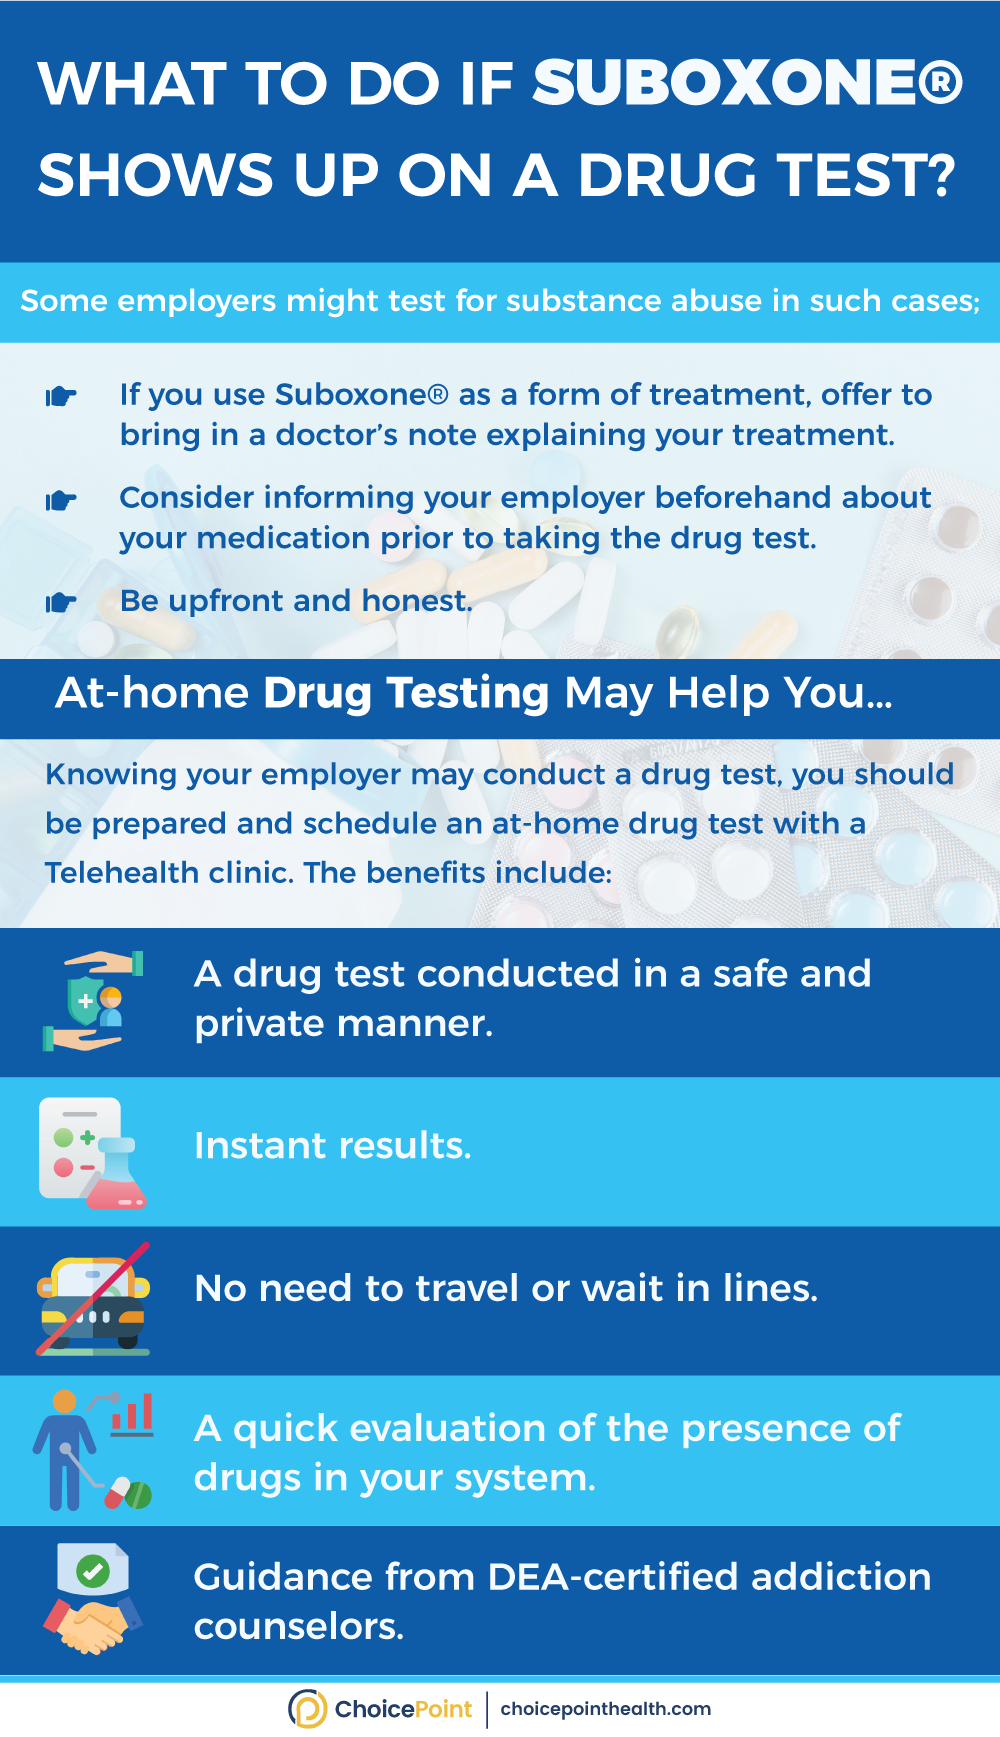 Will Suboxone Show Up in a Drug Test?